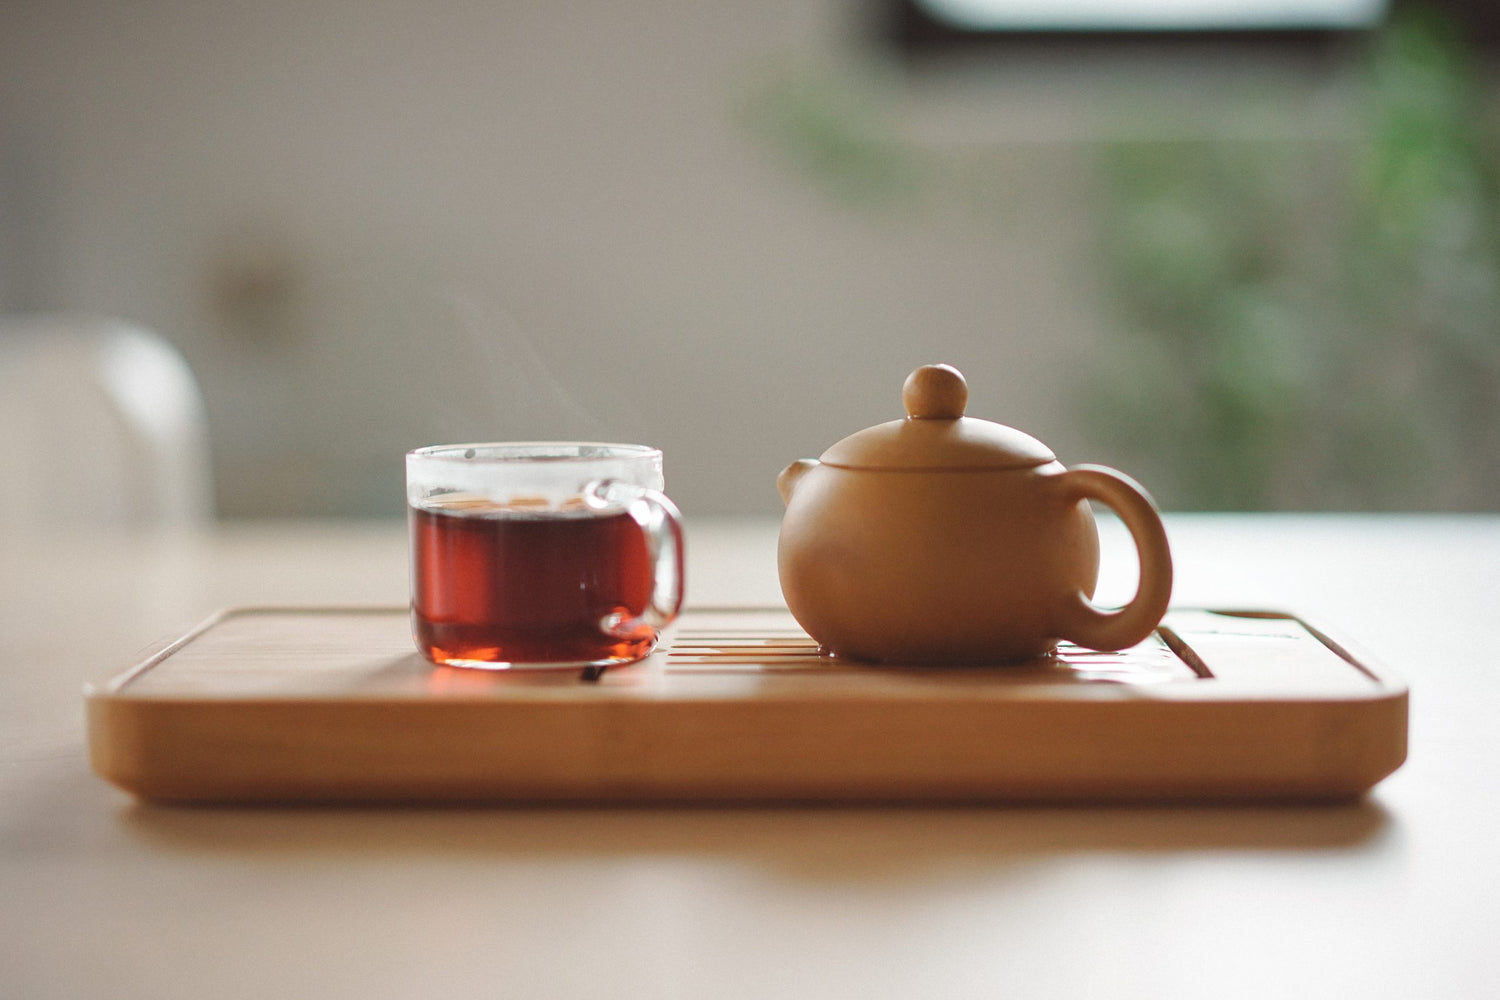 Do You Know the History of Black Tea and Famous Black Tea?